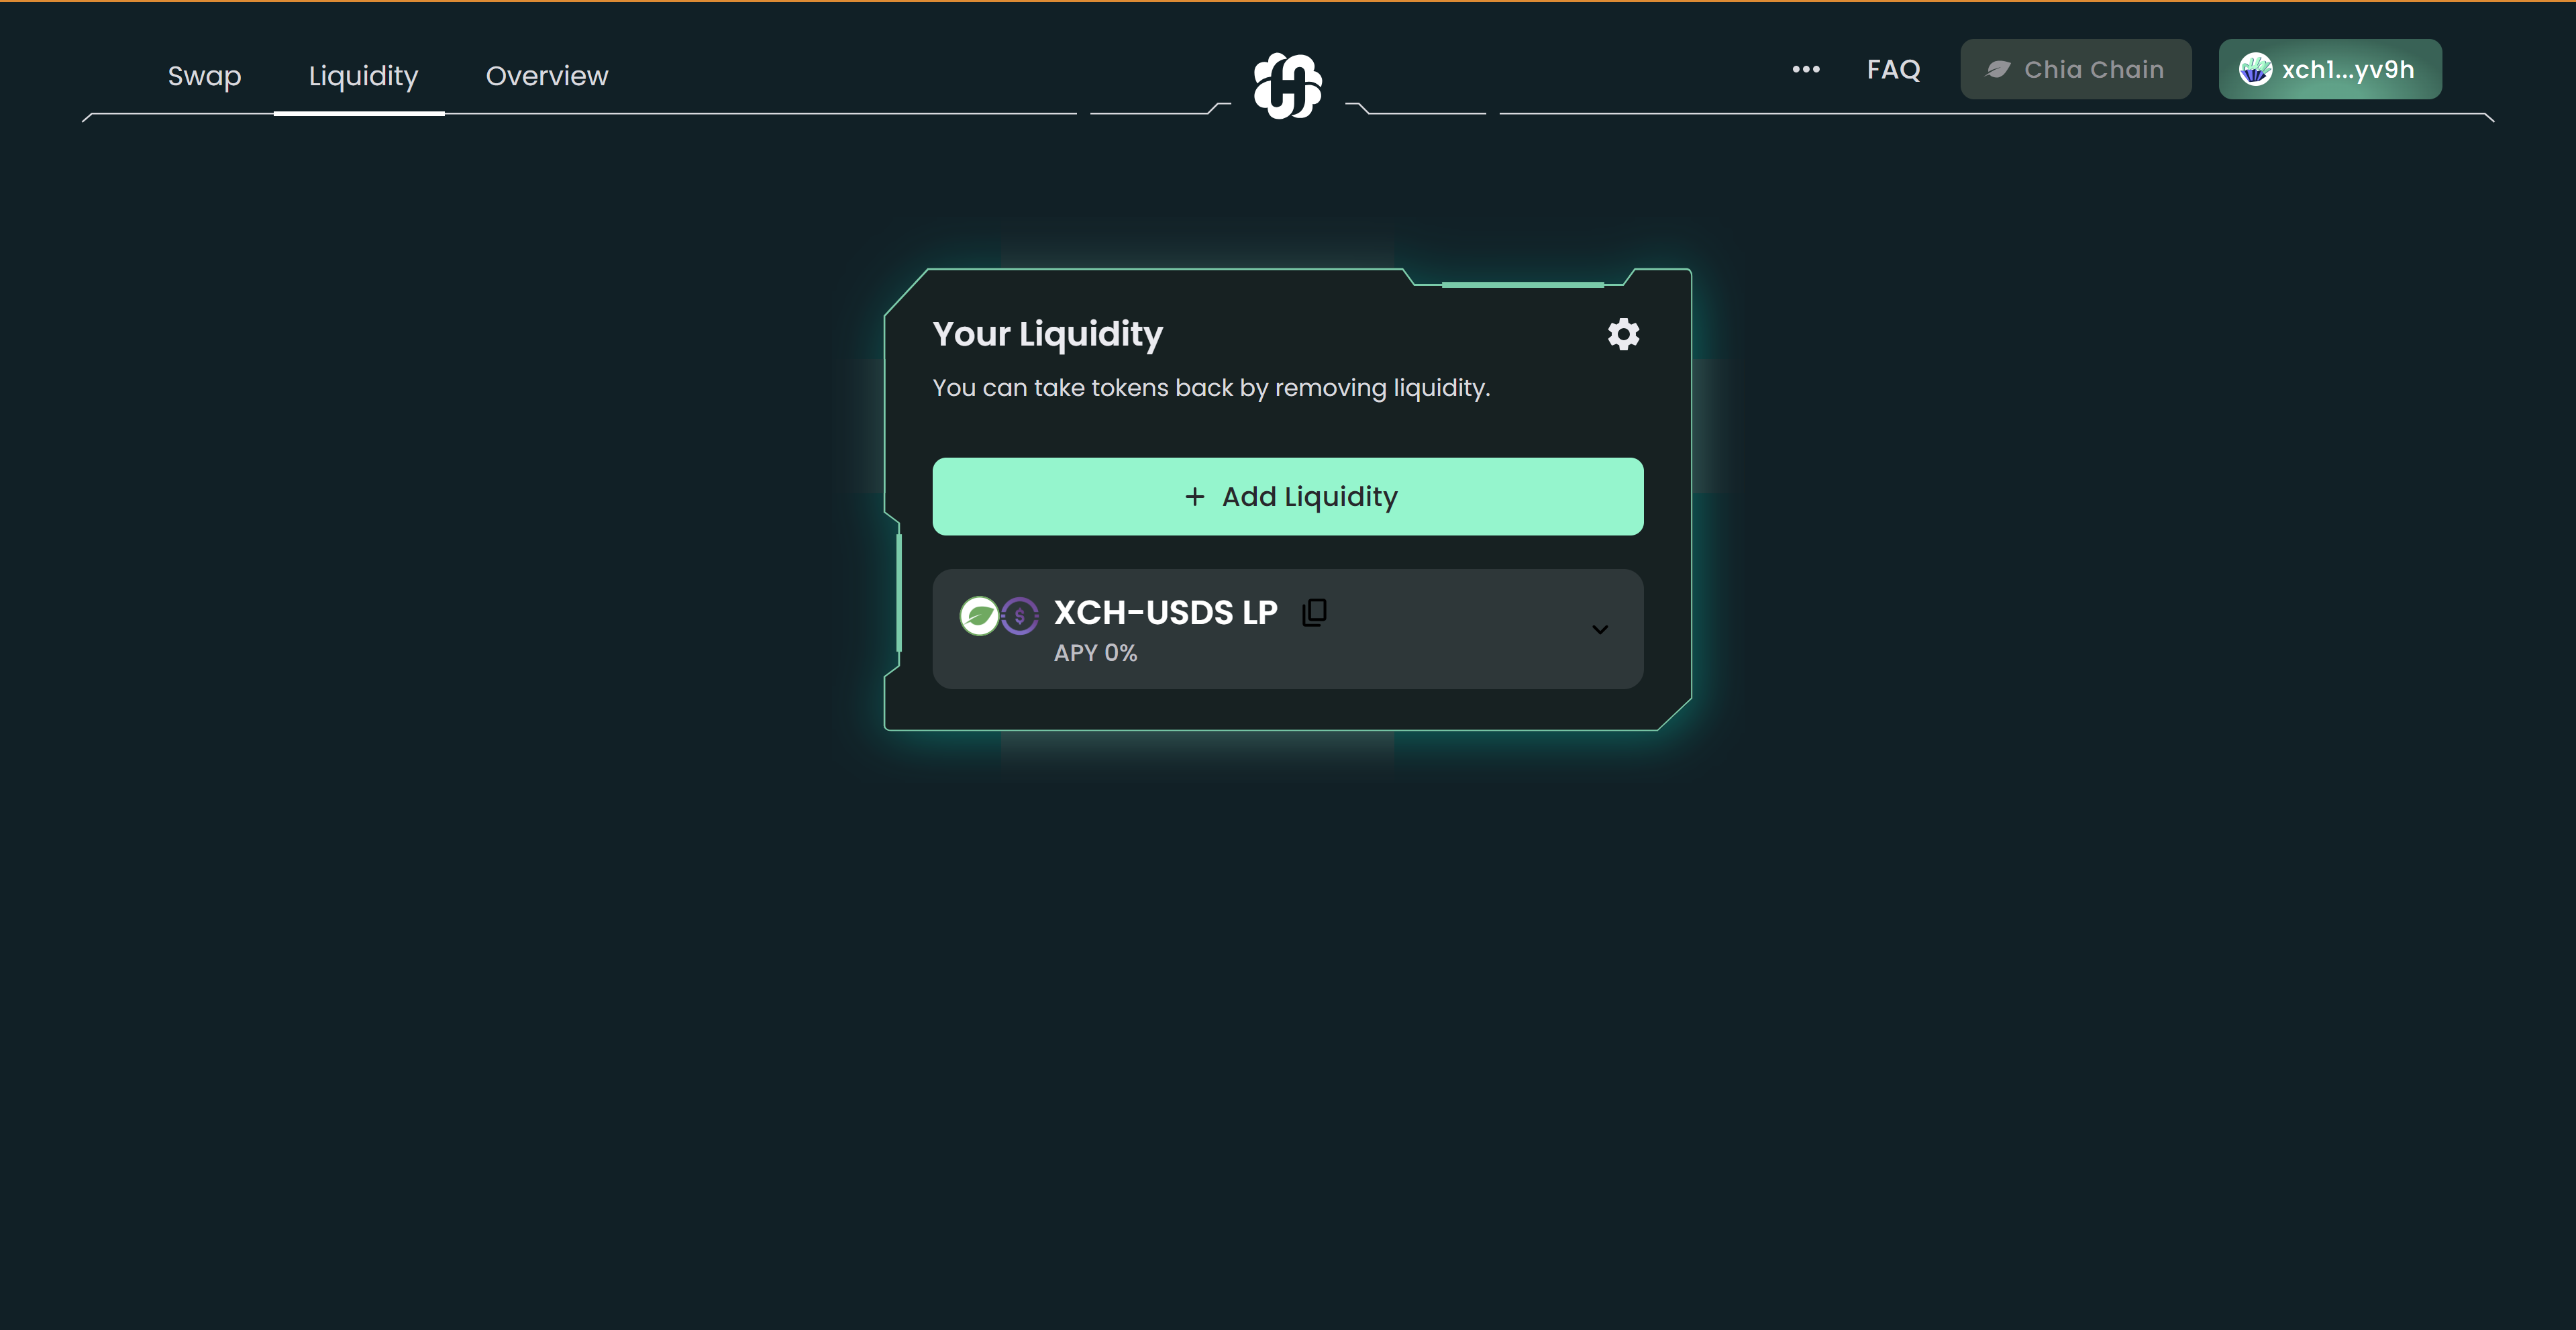 Right: Exsisting pools will show up if you've adding liquidity before.